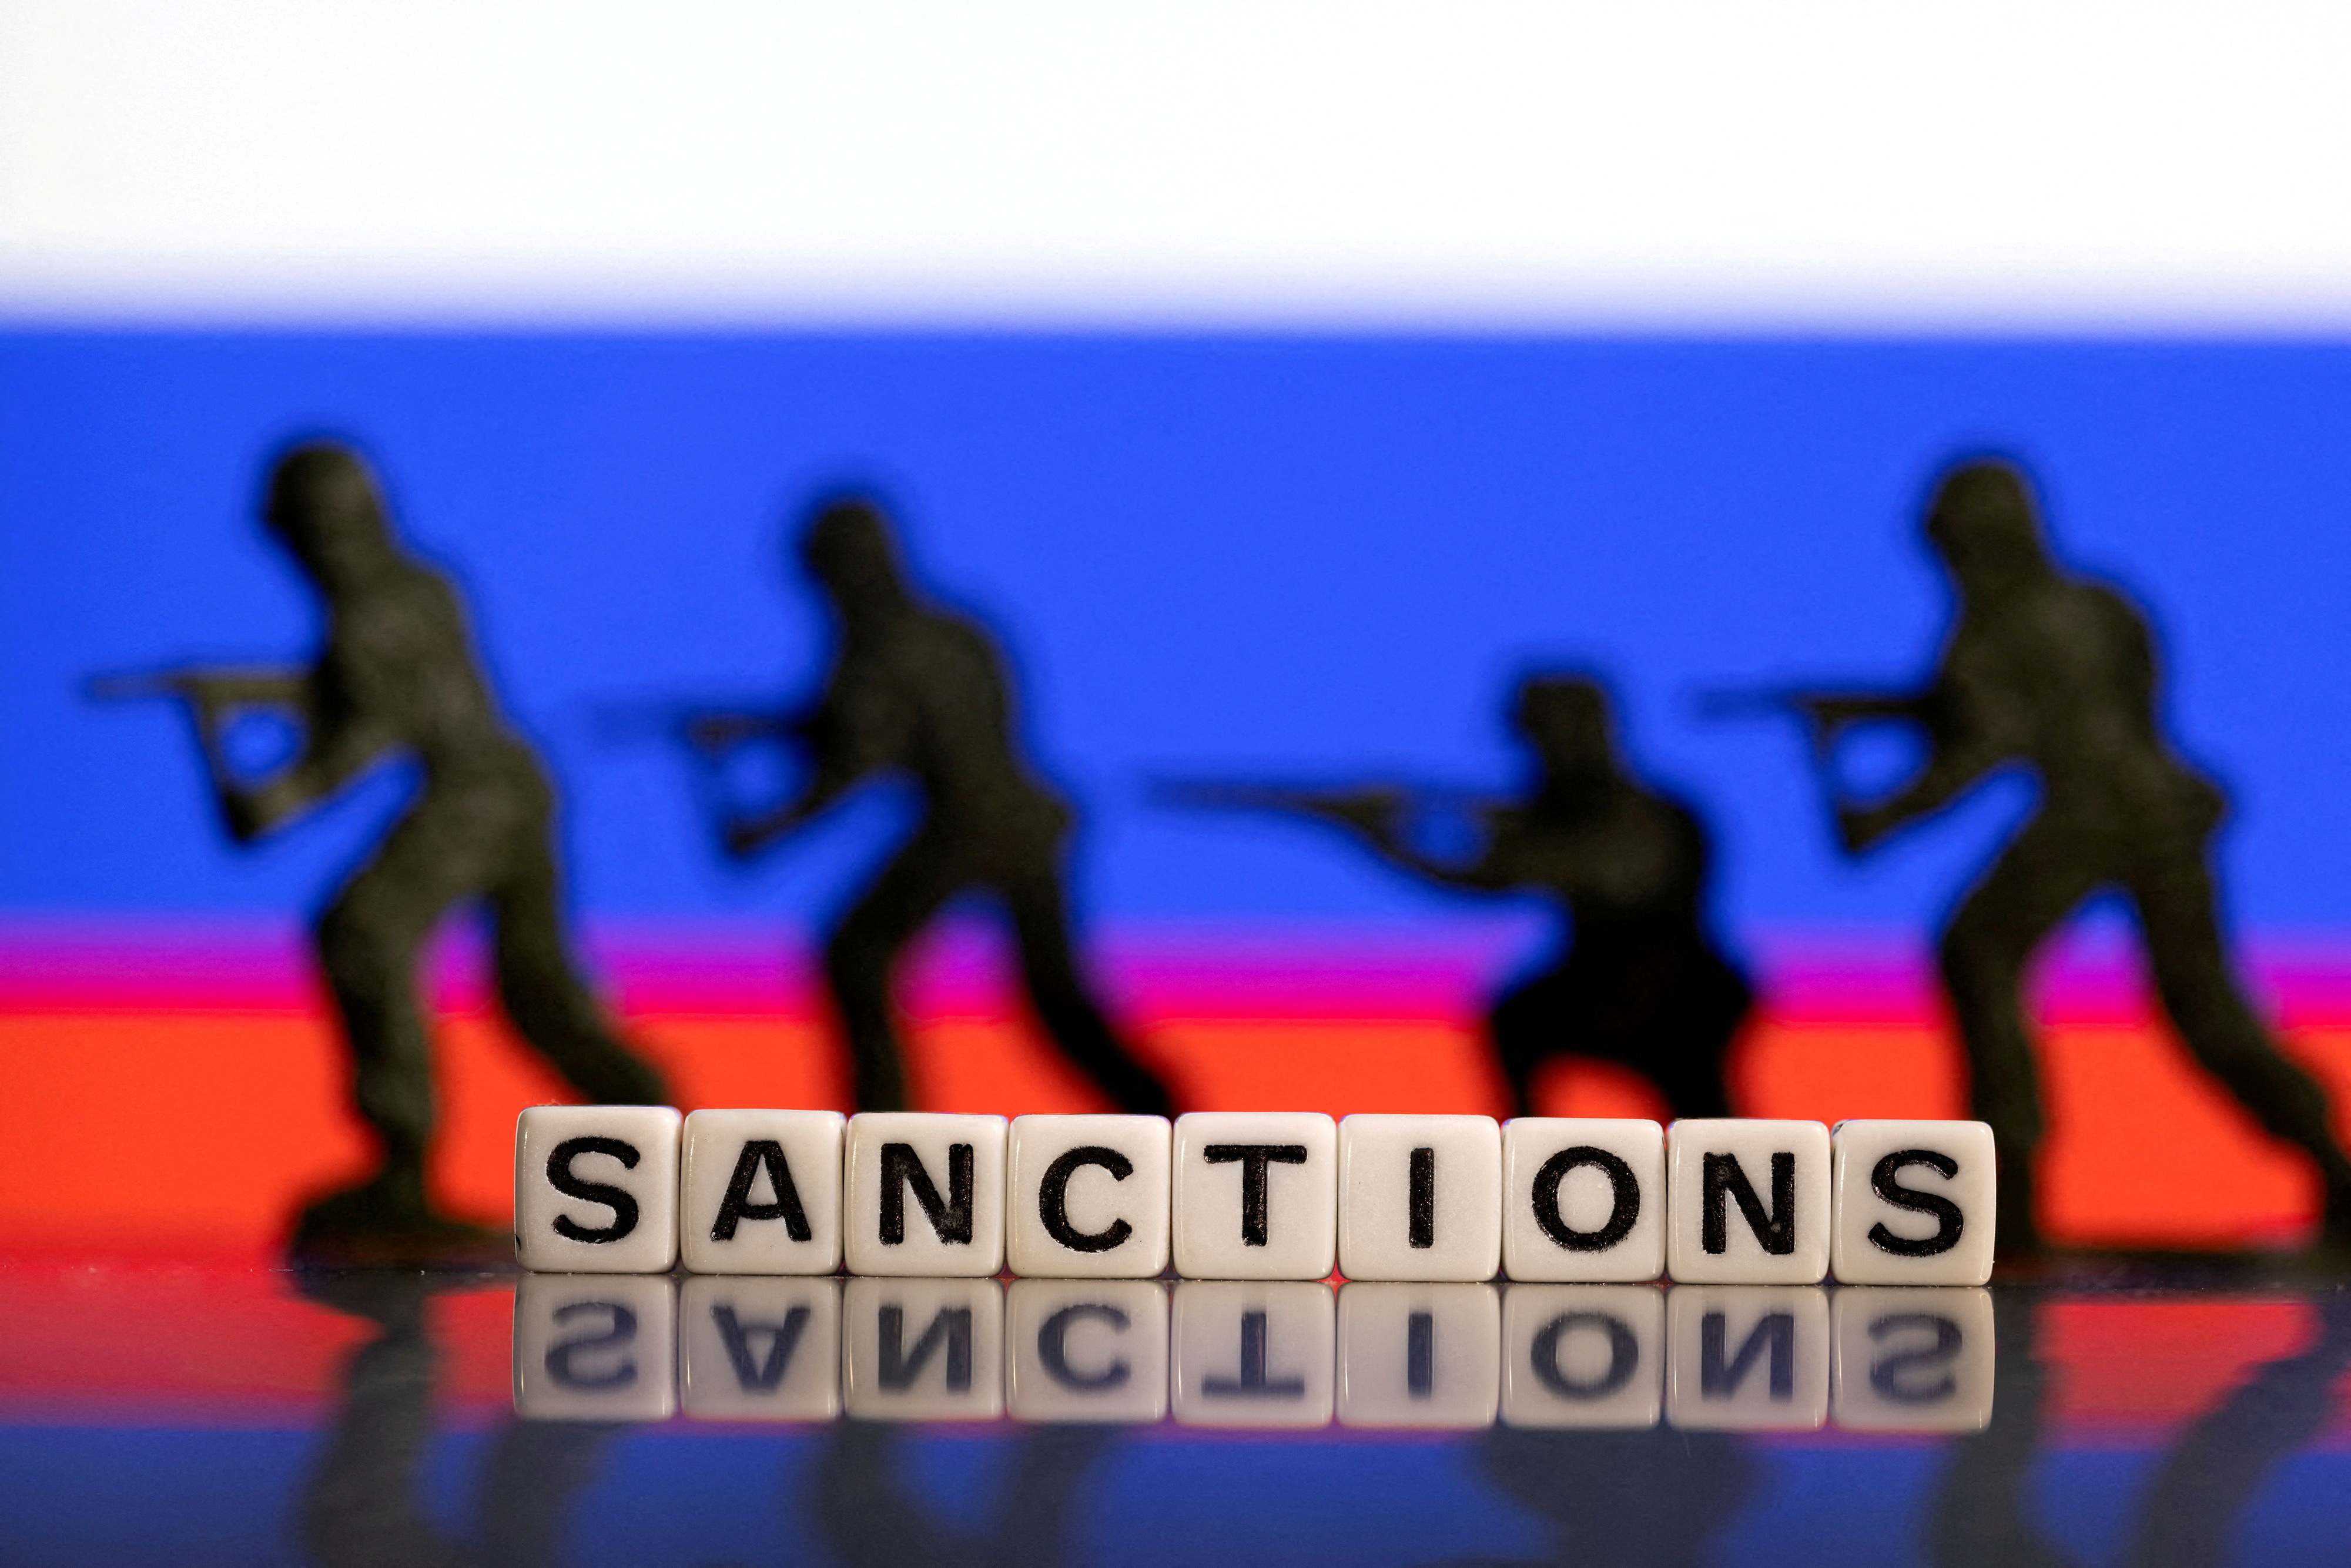 Illustration shows plastic letters arranged to read "Sanctions" and solider toys are placed in front of Russia's flag colors